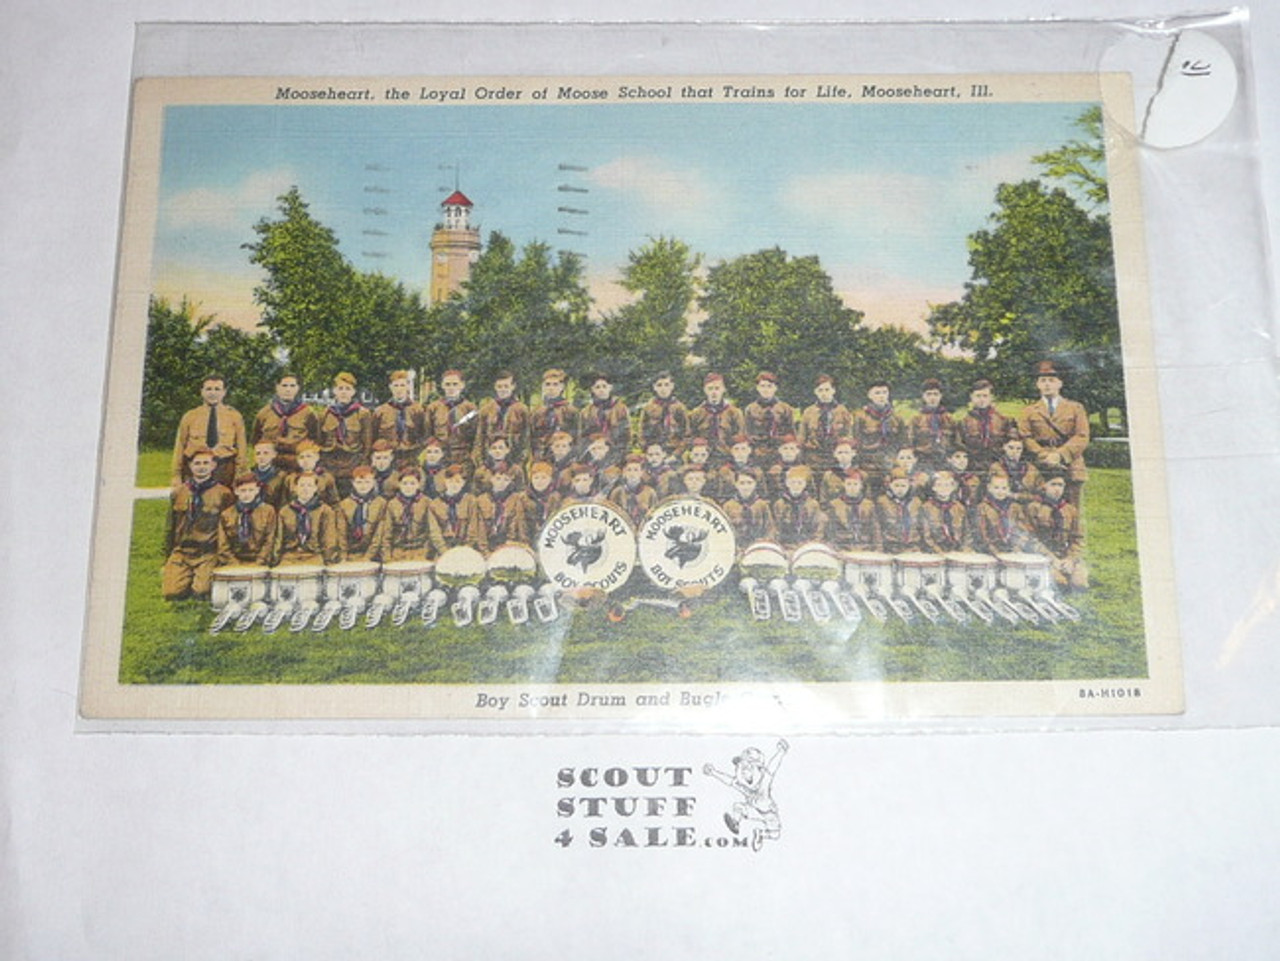 Boy Scout Drum and Bugle Corp of Mooseheart School Post Card, 1944